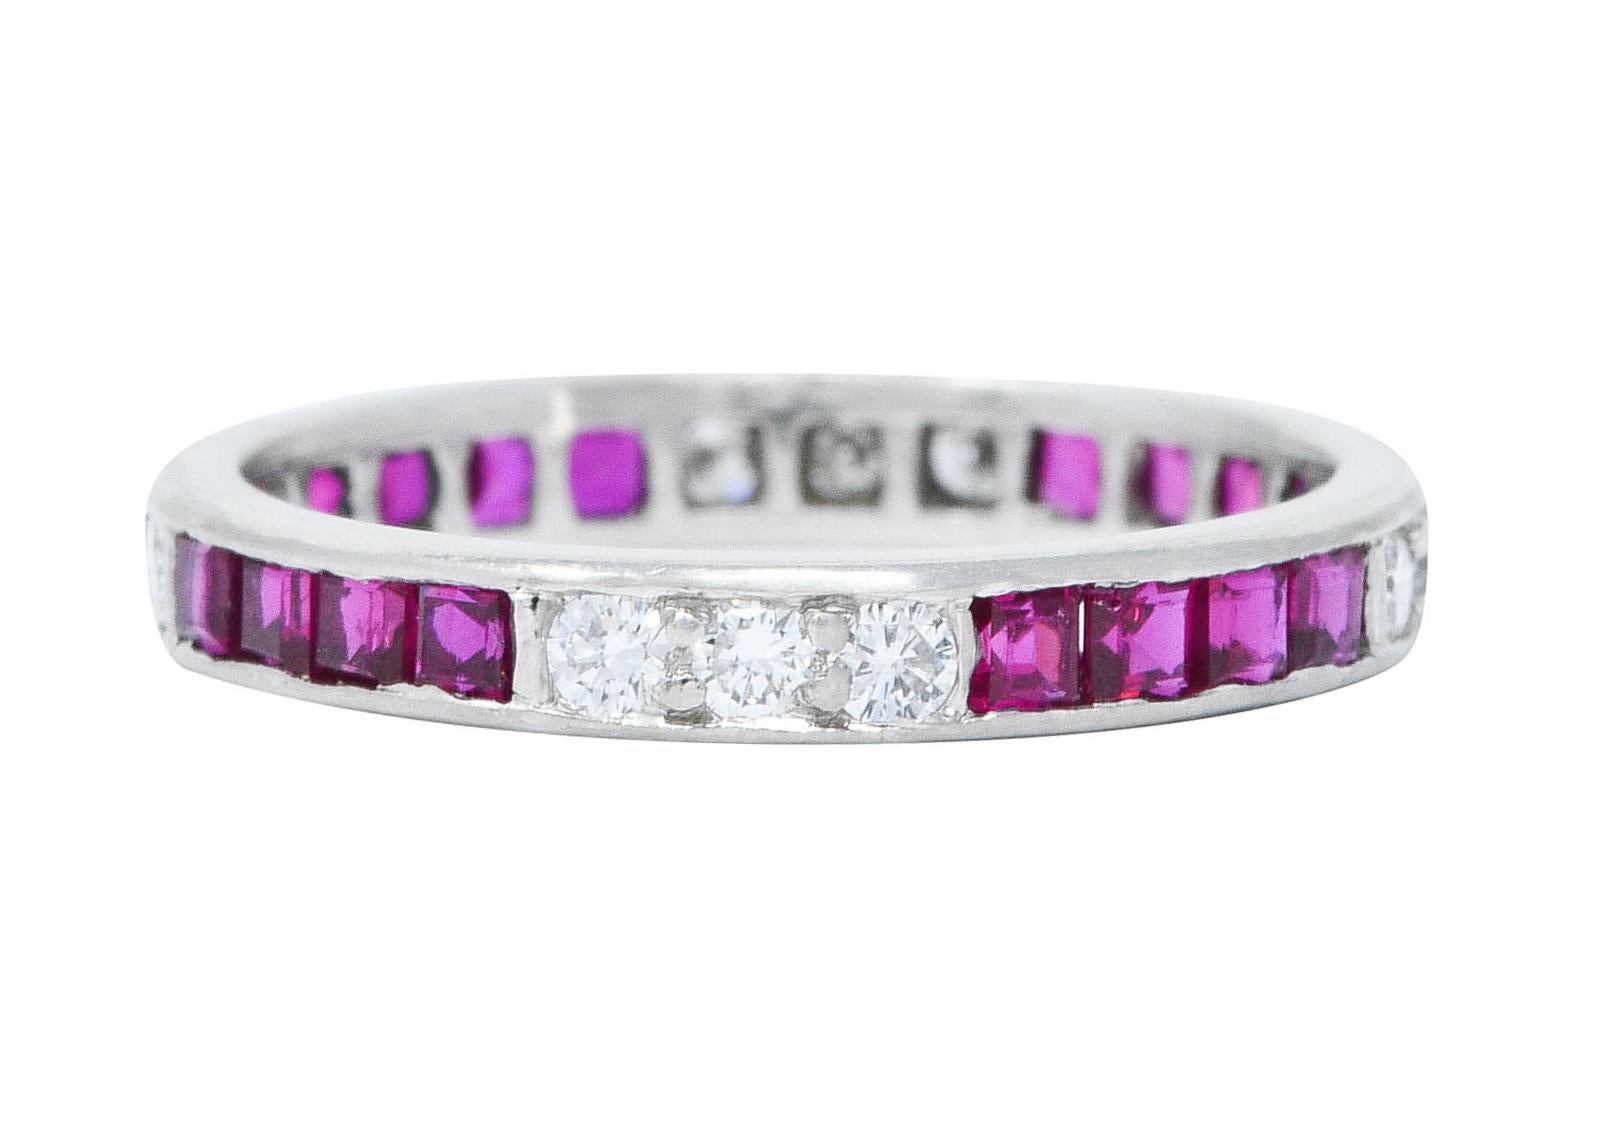 Eternity band ring features round brilliant diamonds alternating with square cut rubies

Diamonds are bead set while weighing in total approximately 0.36 carat - G to I color with SI clarity

Rubies are channel set while weighing in total